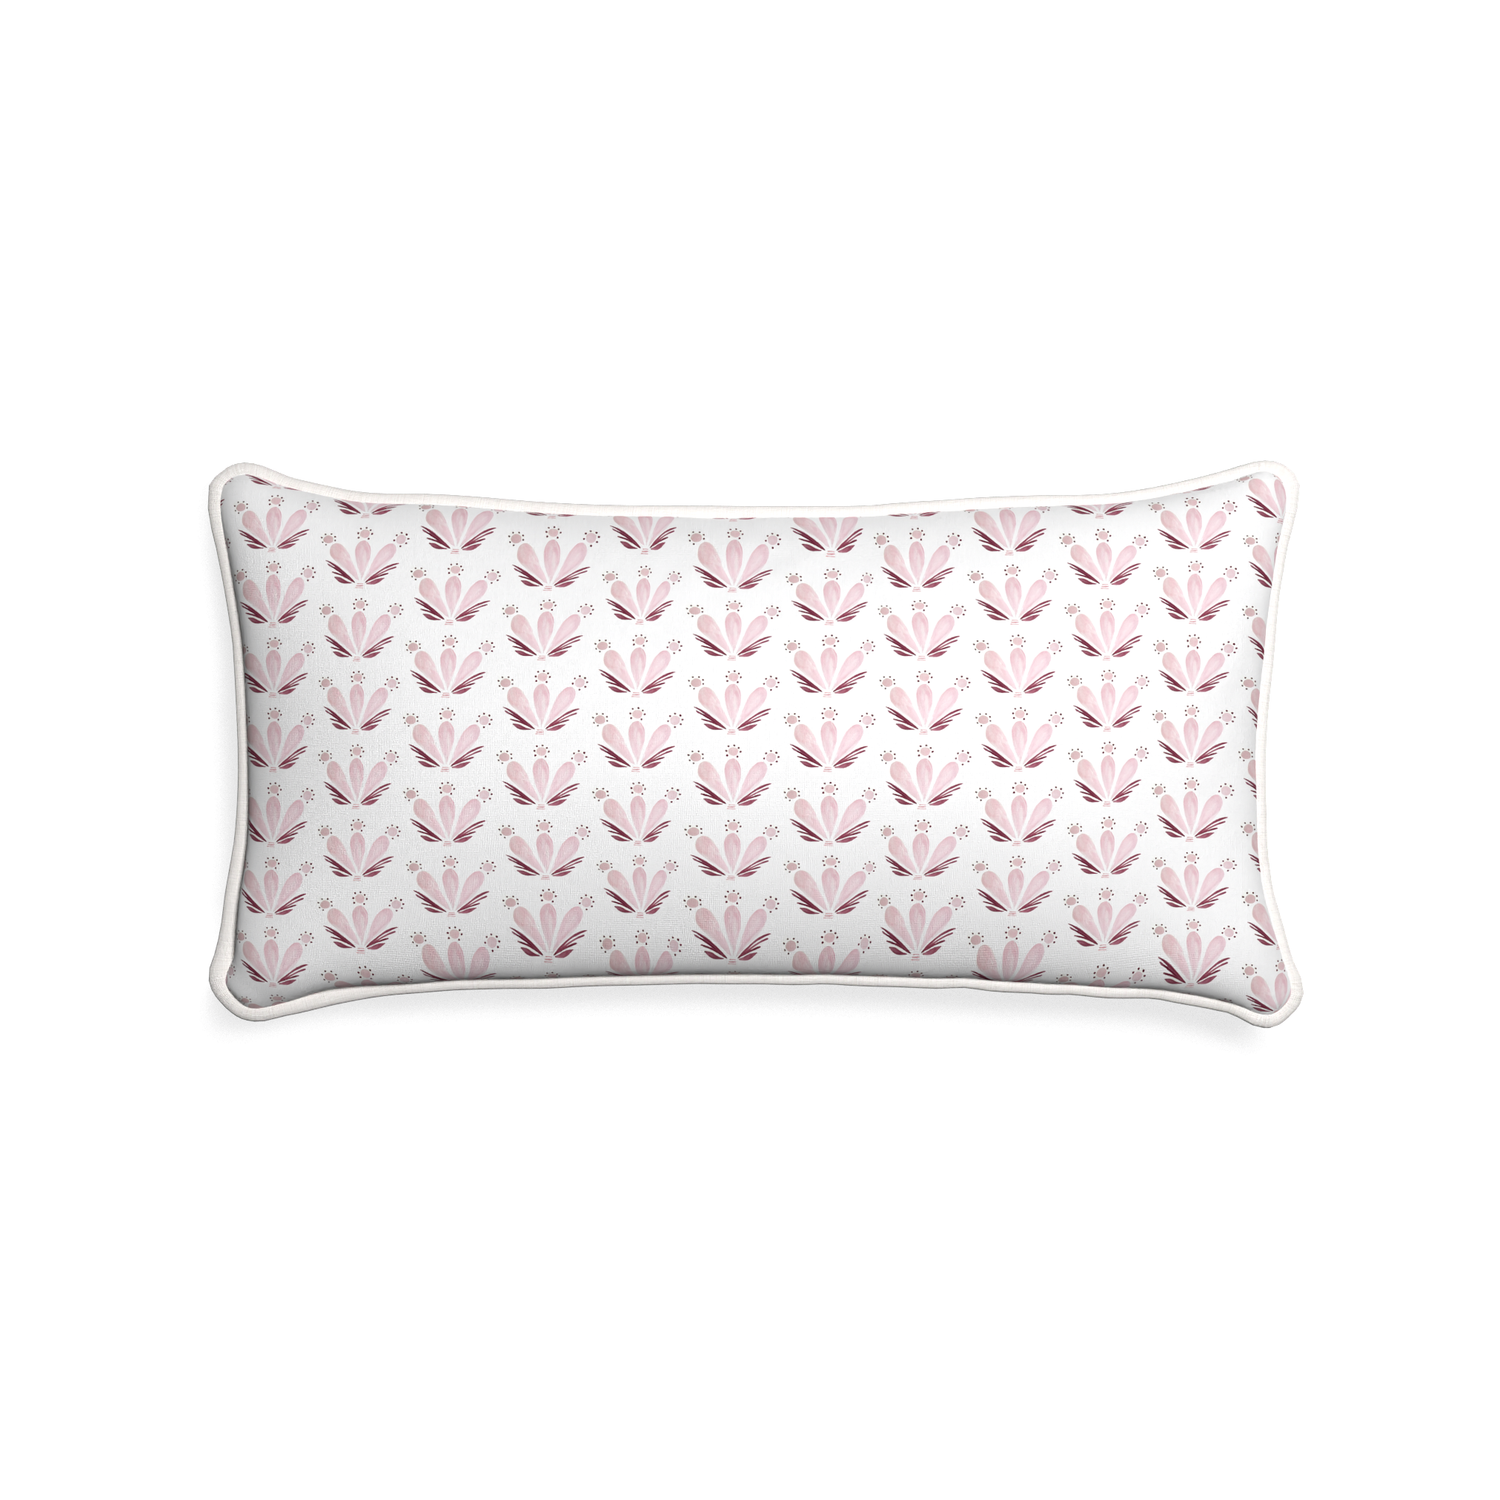 Midi-lumbar serena pink custom pink & burgundy drop repeat floralpillow with snow piping on white background